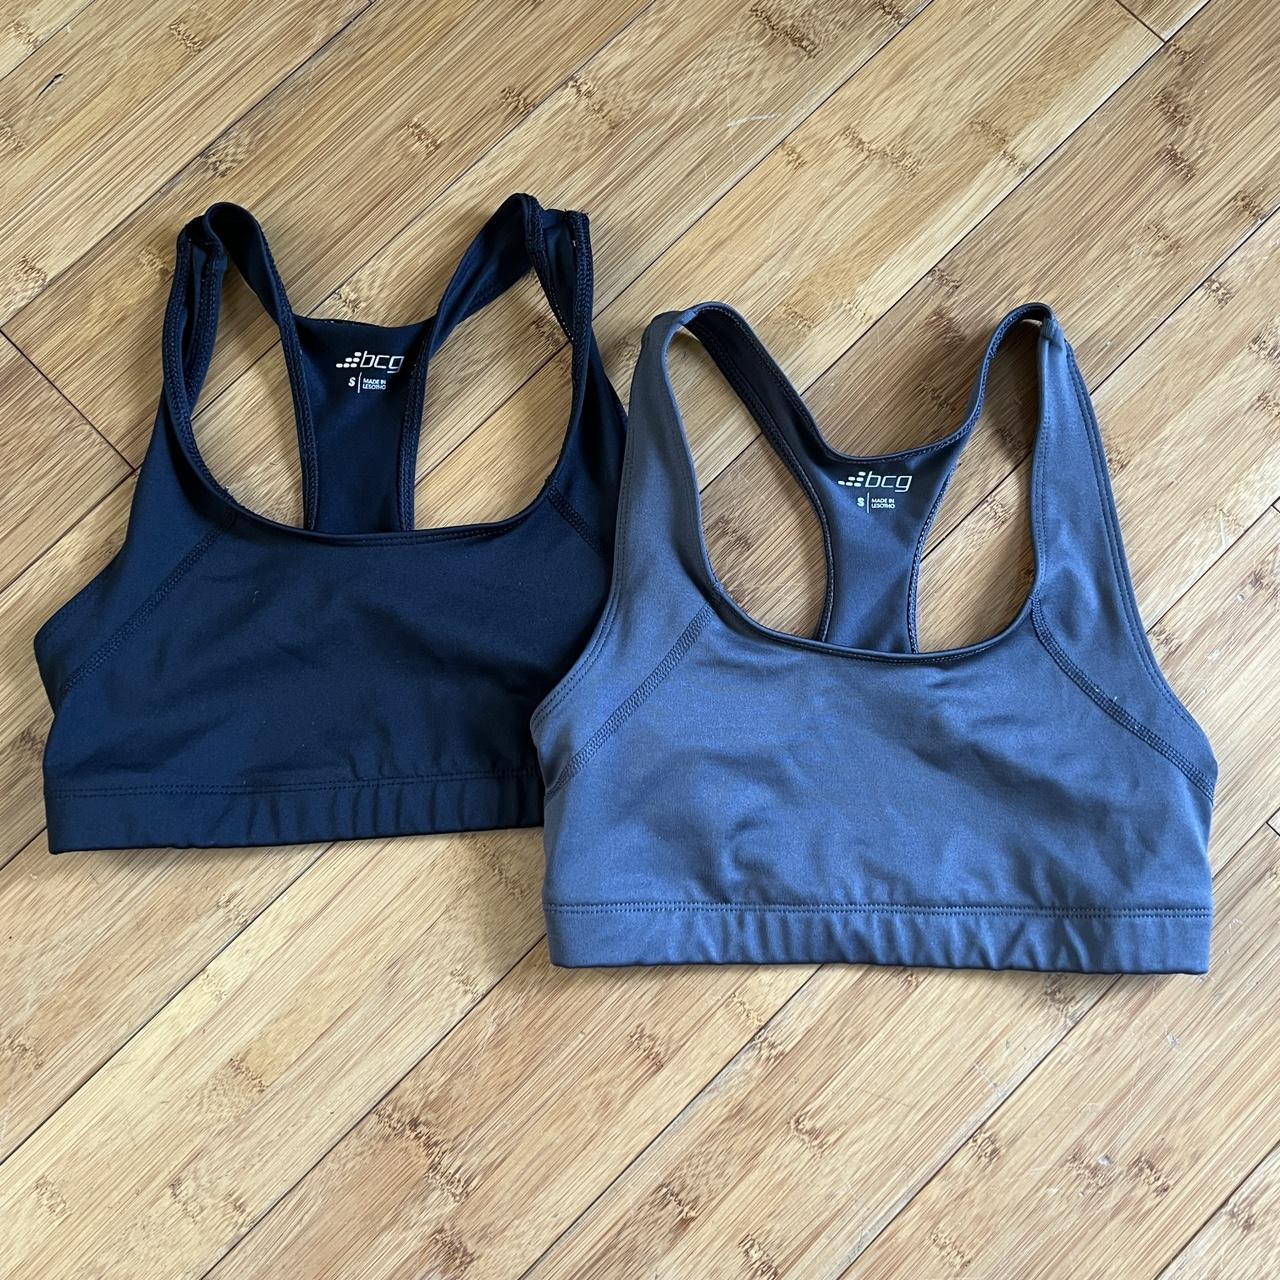 BCG Preowned Sports Bras Bundle, -Size: S, #bcg